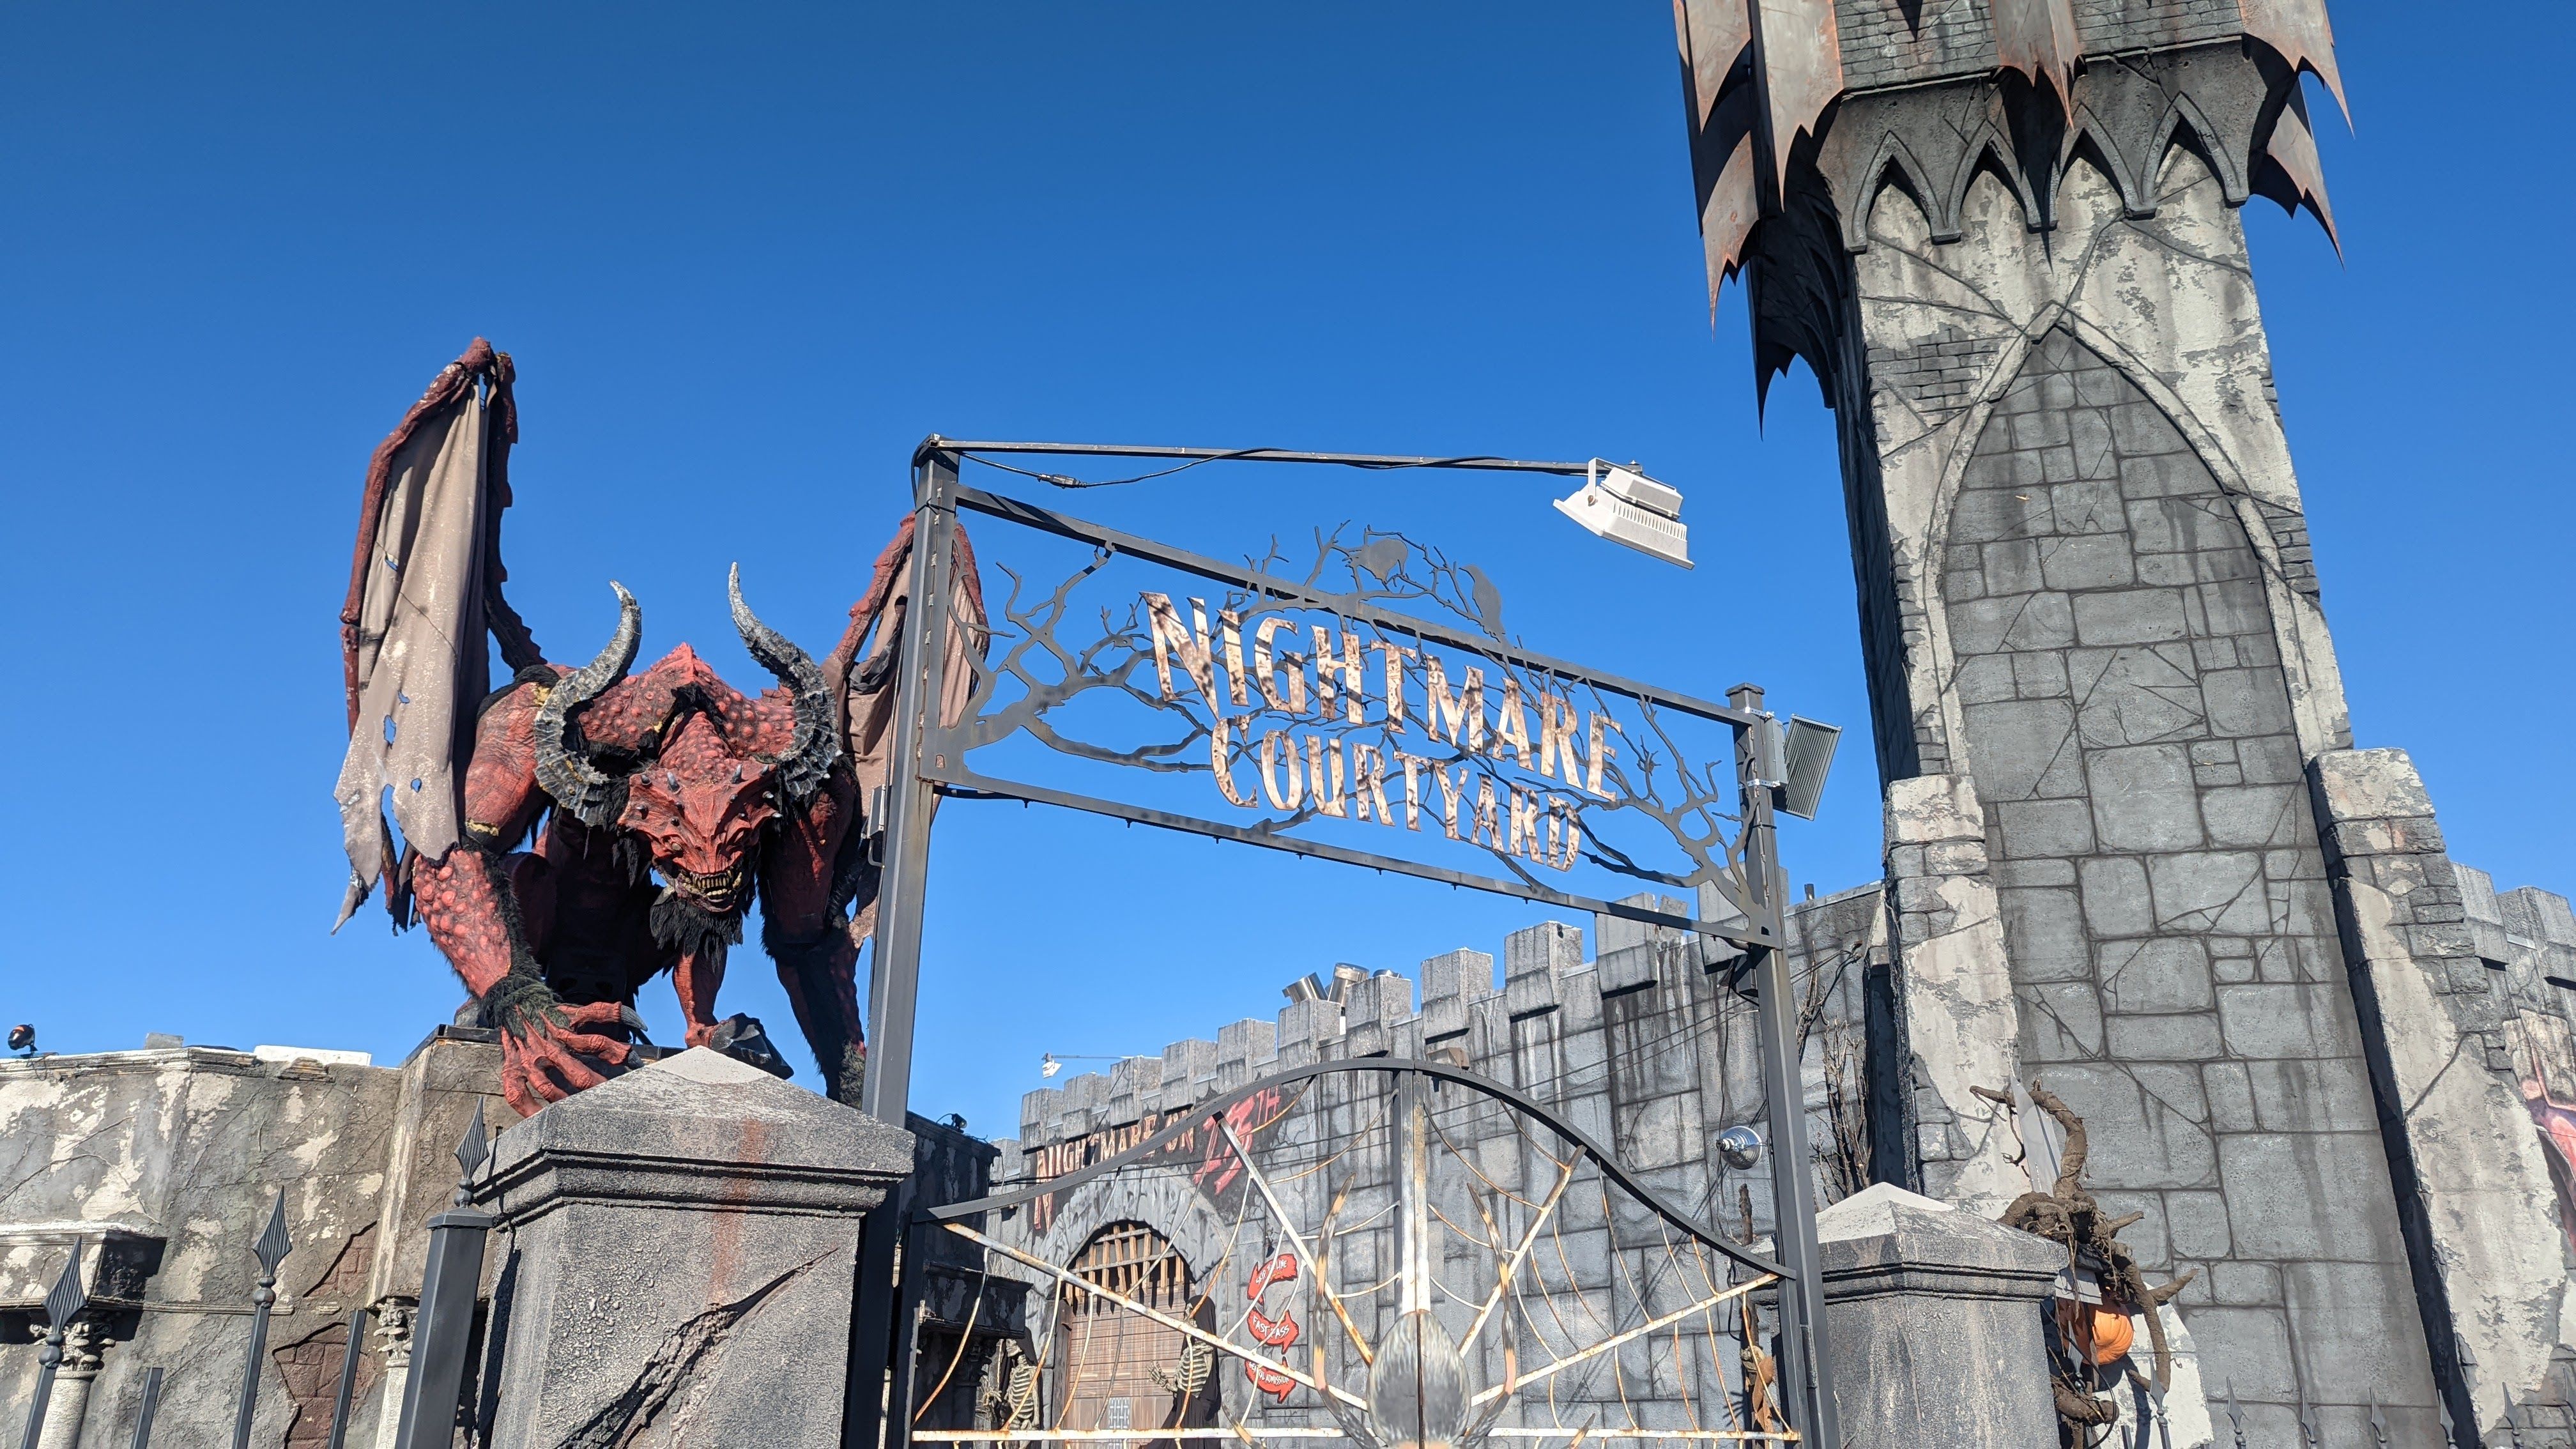 A winged demon animatronic stands next to a jagged castle tower and a sign that reads "Nightmare Courtyard."